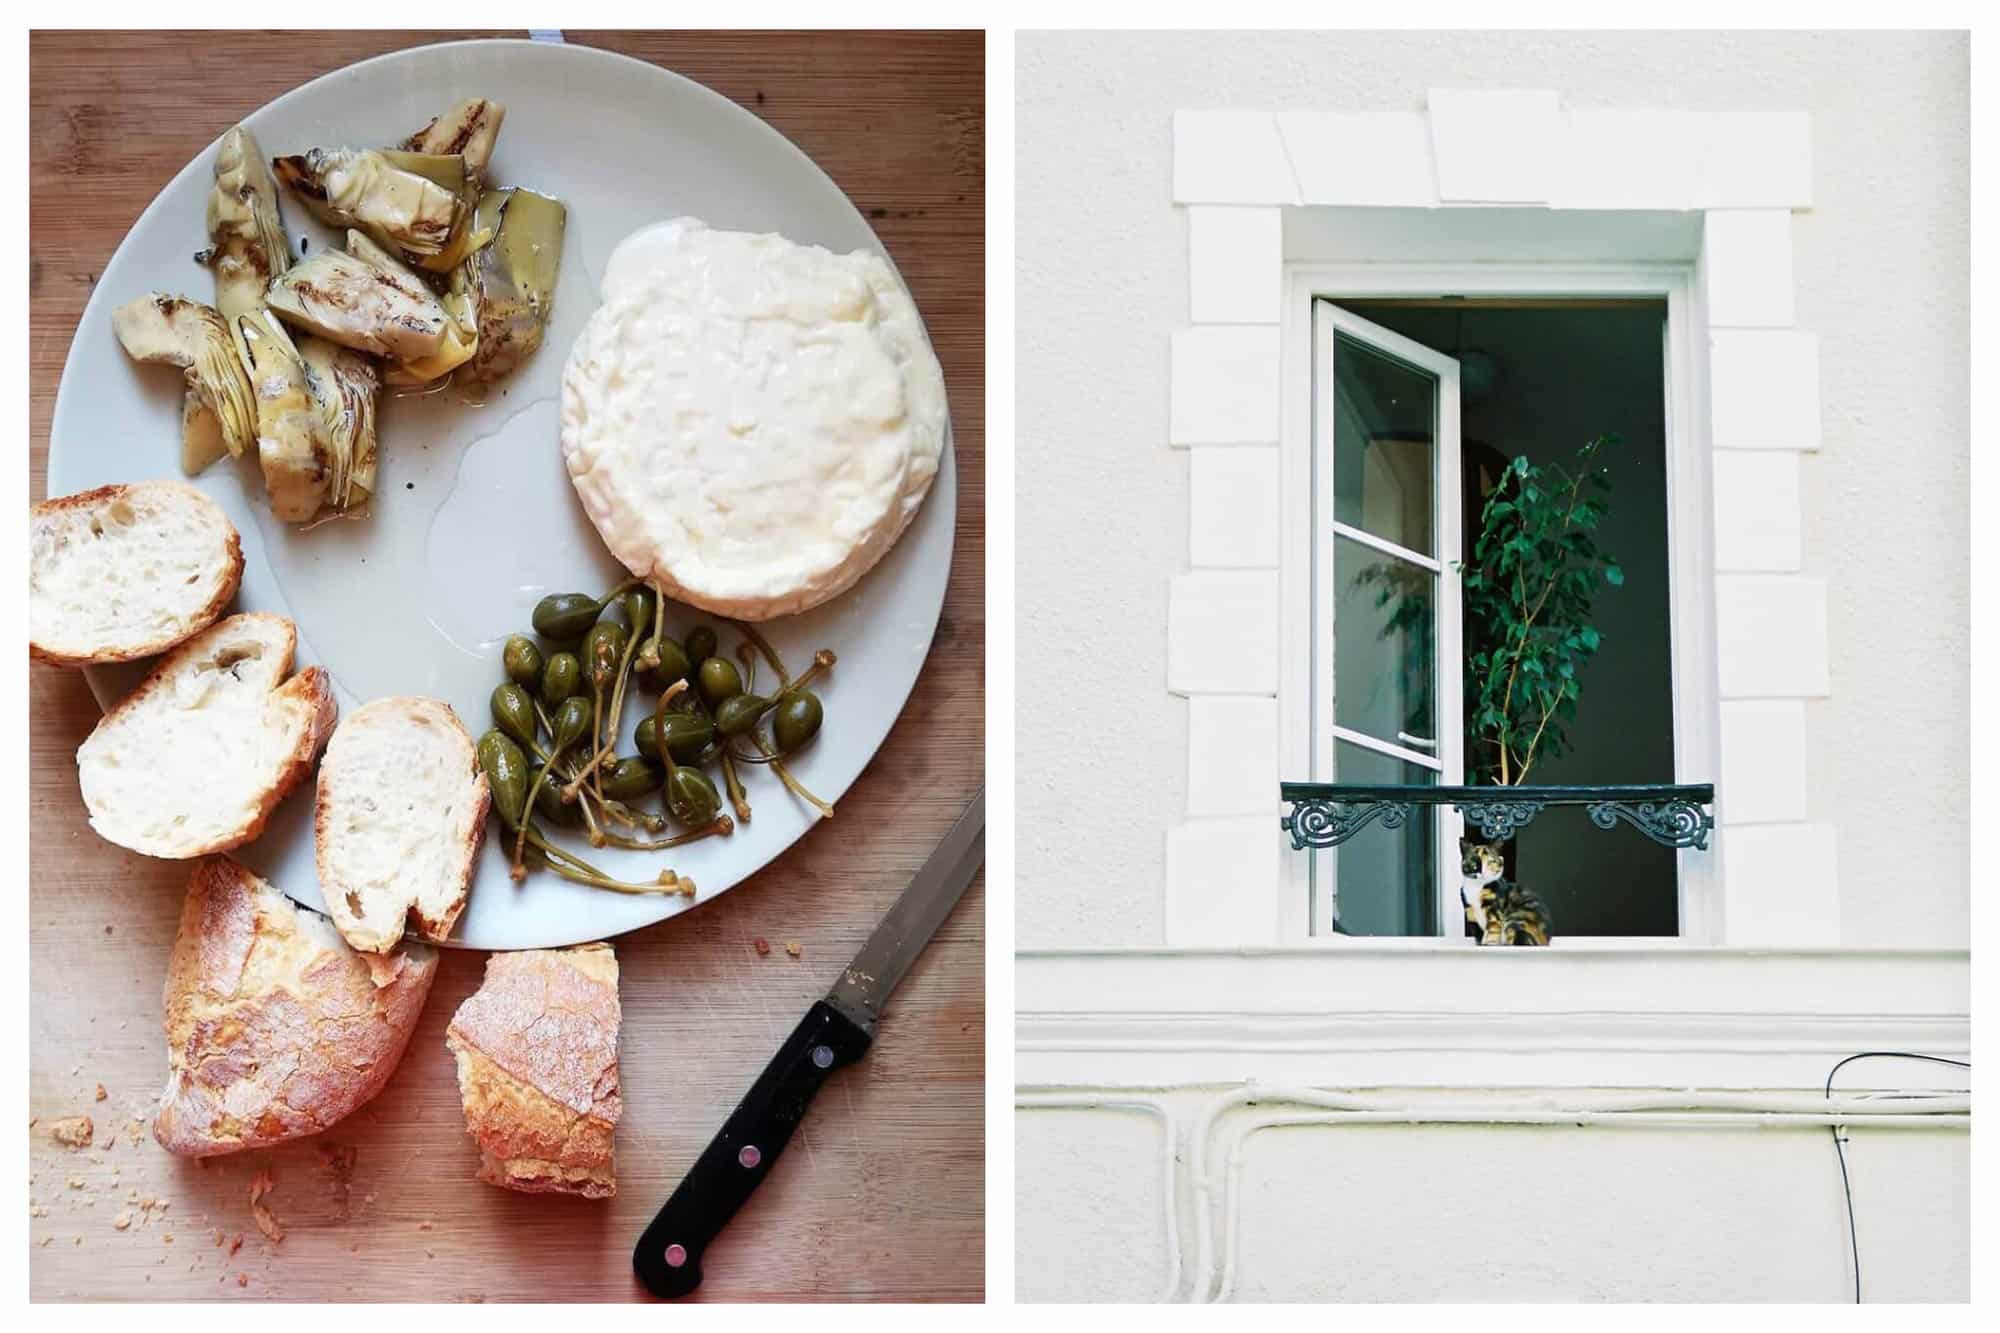 Left: a plate with cut pieces of a baguette, cheese, olives, artichokes. There is a knife to the right of the plate. Right: A window in Paris with a cat sitting on it. There is a tree inside the apartment that is visible.